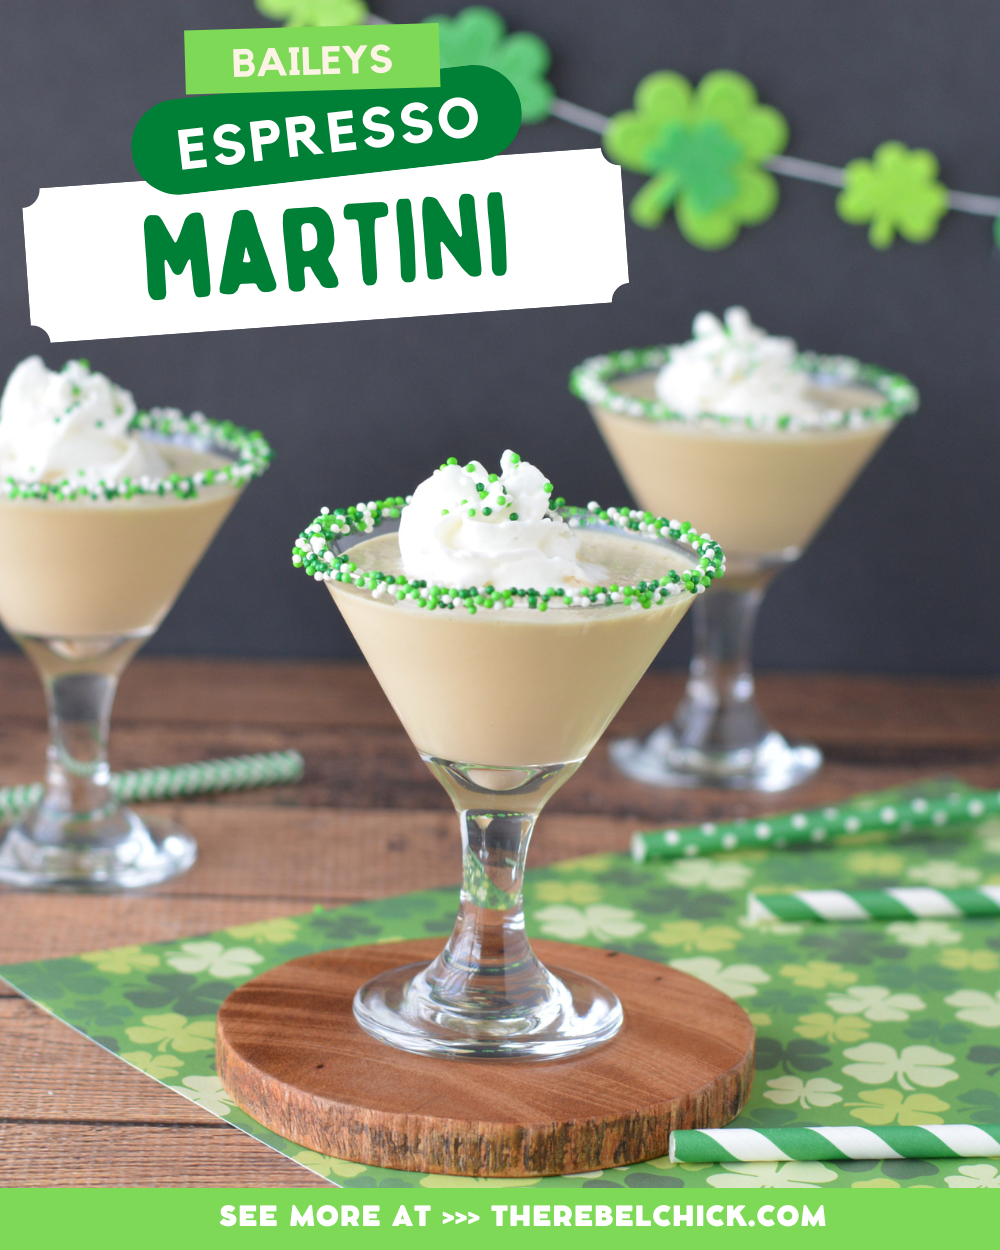 https://therebelchick.com/wp-content/uploads/2019/02/The-Best-Espresso-Martini-with-Baileys-for-Saint-Patricks-Day.png